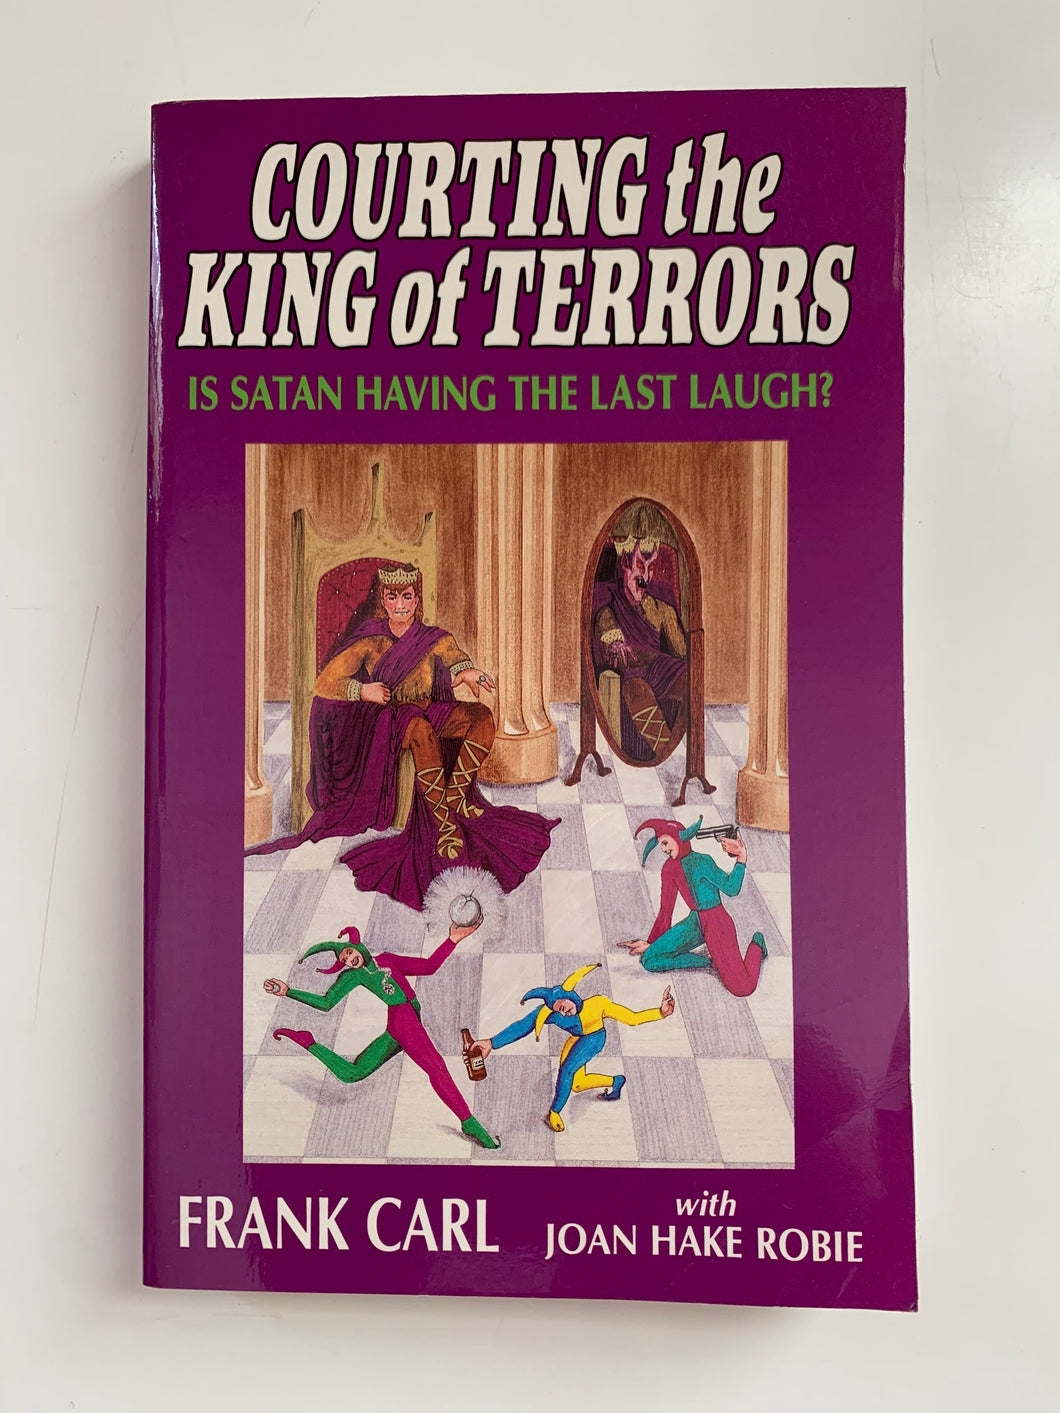 Courting the King of Terrors: Is Satan Having the Last Laugh? by Frank Carl